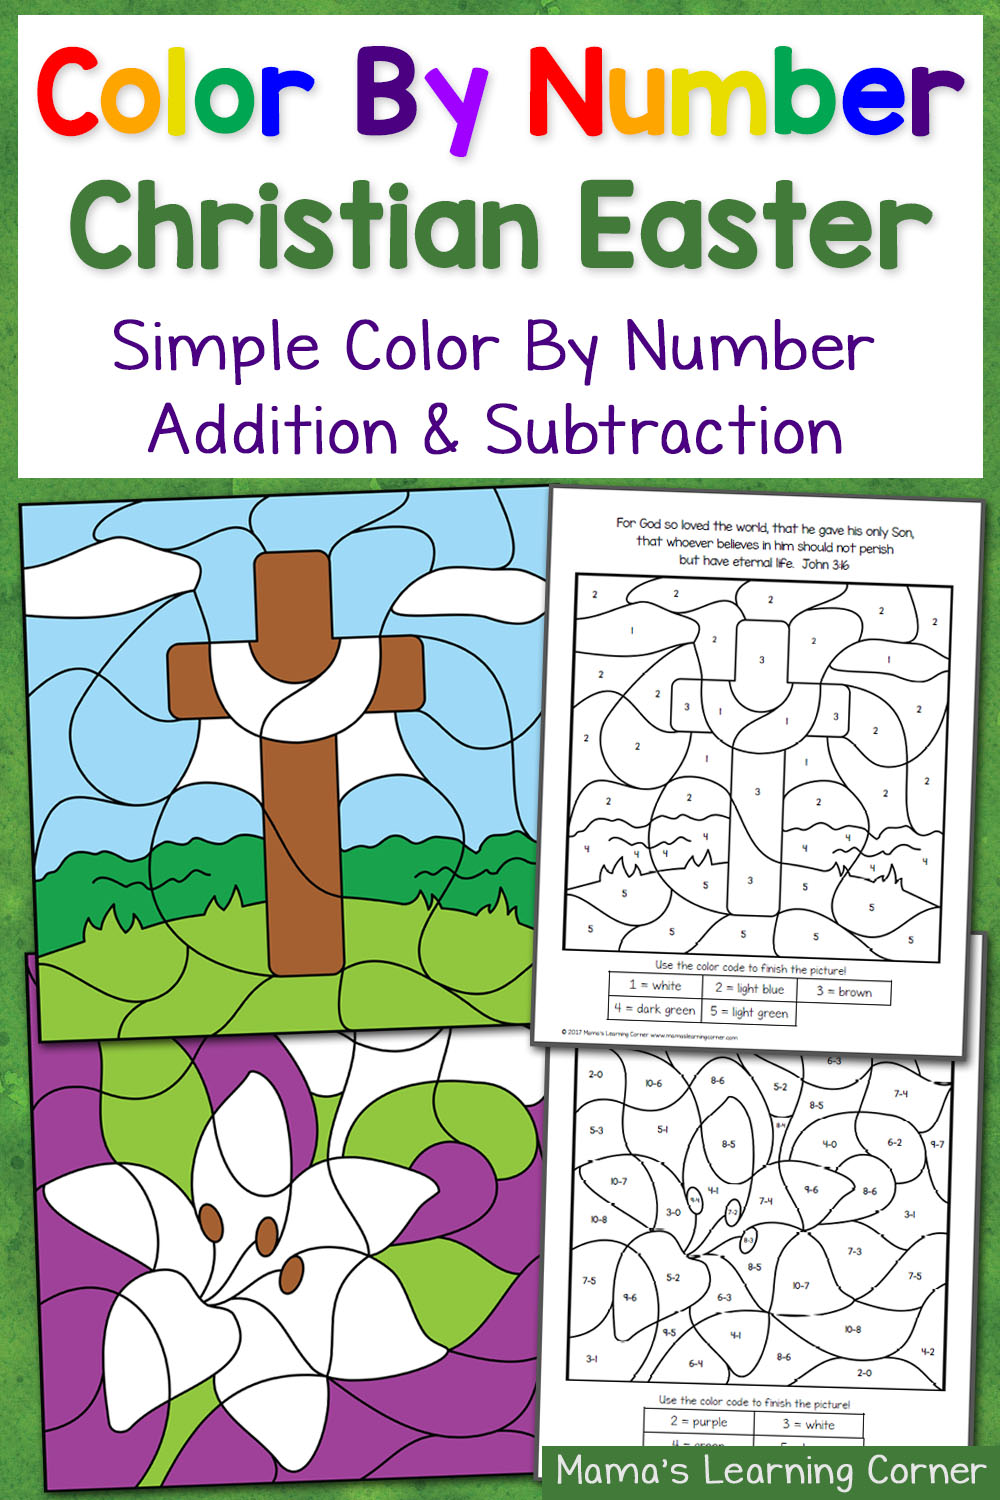 Christian Easter Color By Number Worksheets - Mamas Learning Corner